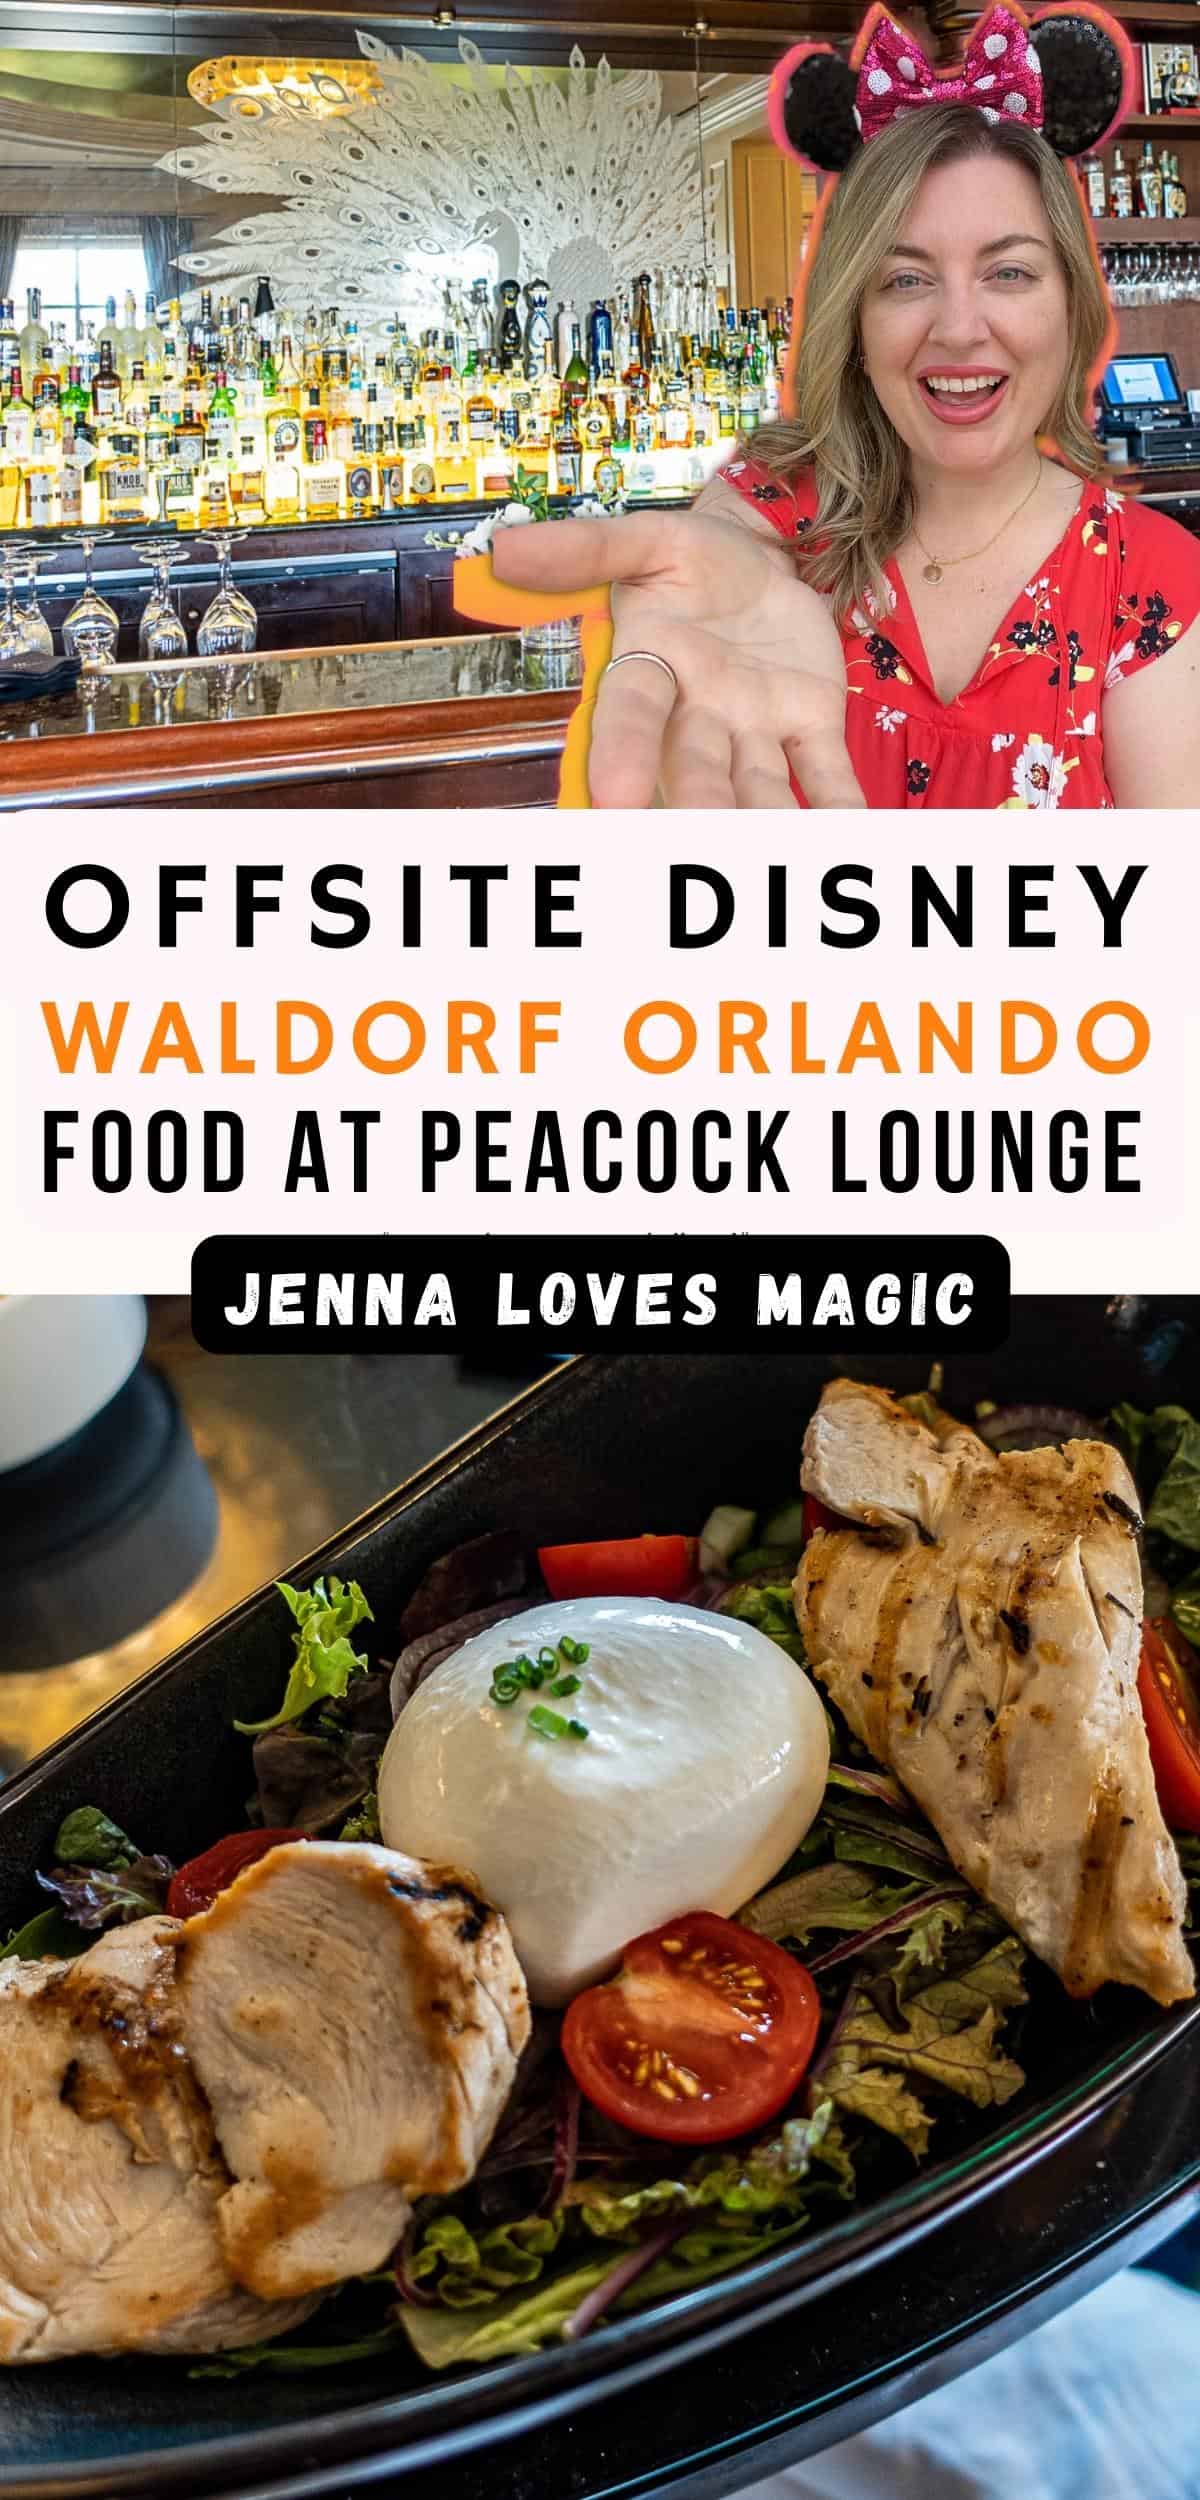 Offsite Disney World Dining at Waldorf Astoria Orlando Peacock Lounge with text overlay and Jenna Loves Magic logo